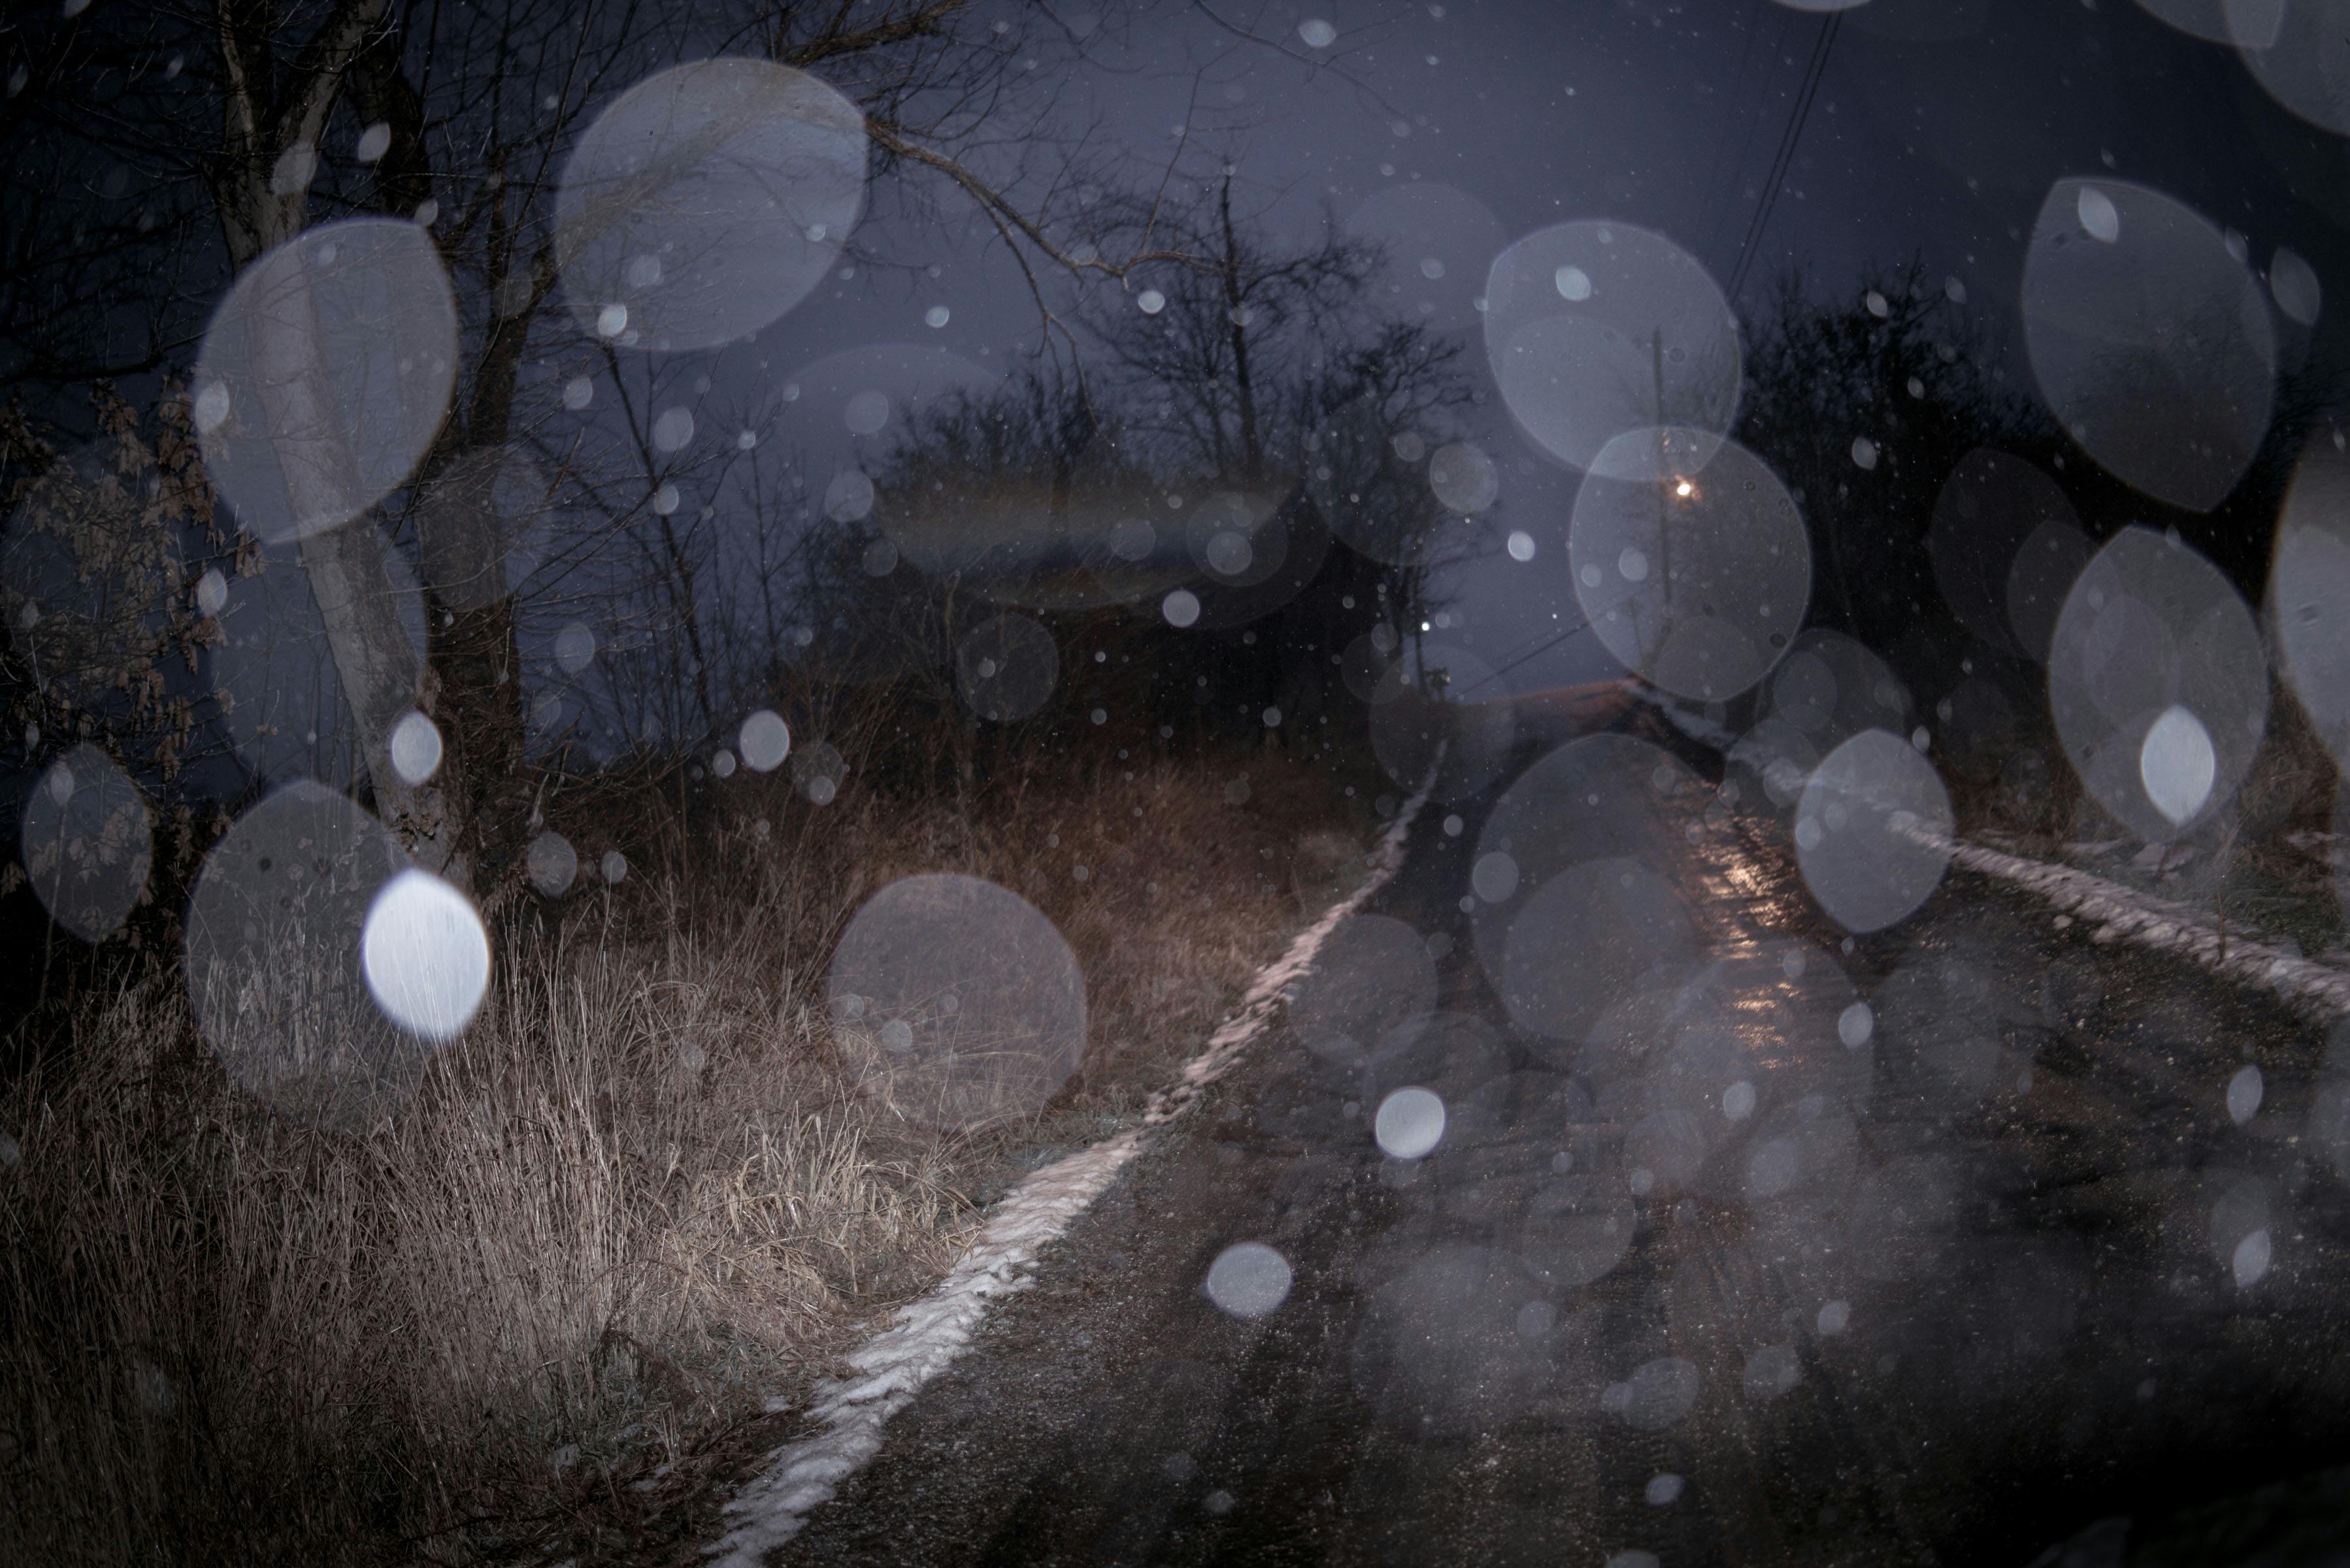 The Black Mechanism #5 by Todd Hido, Obscura Curated Commission.